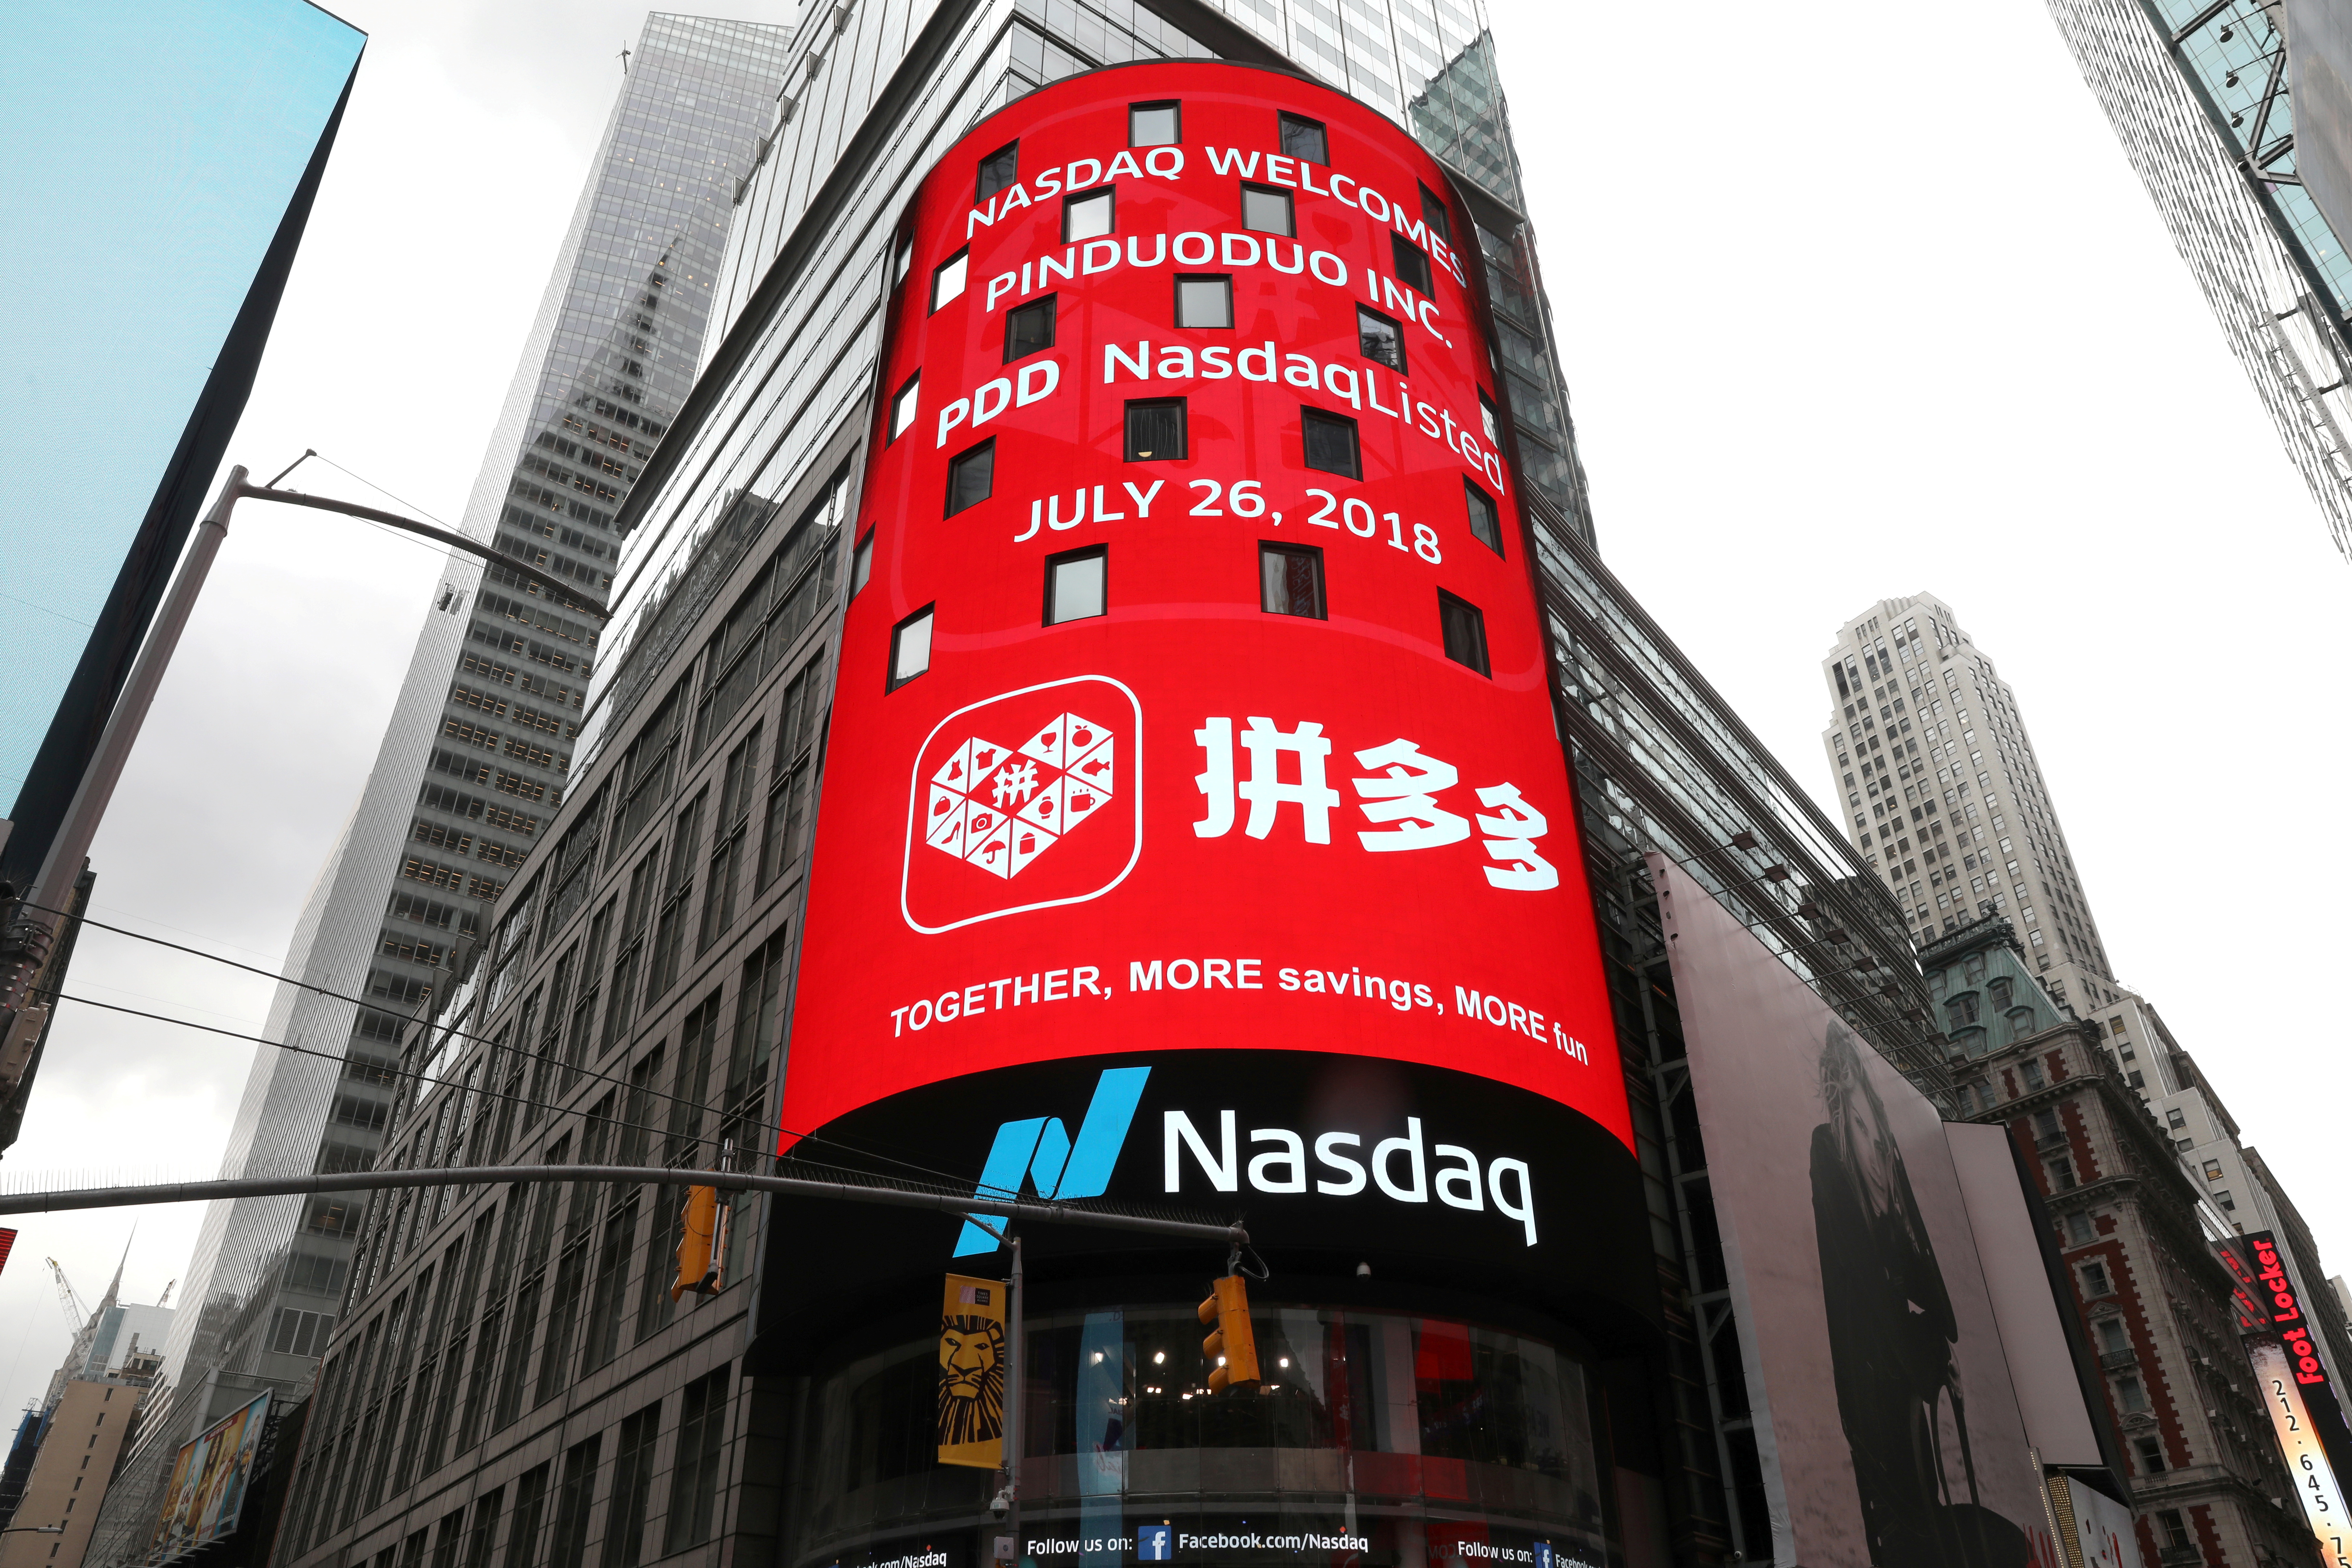 A display at the Nasdaq Market Site shows a message after Chinese online group discounter Pinduoduo Inc. (PDD) was listed on the Nasdaq exchange in Times Square in New York City